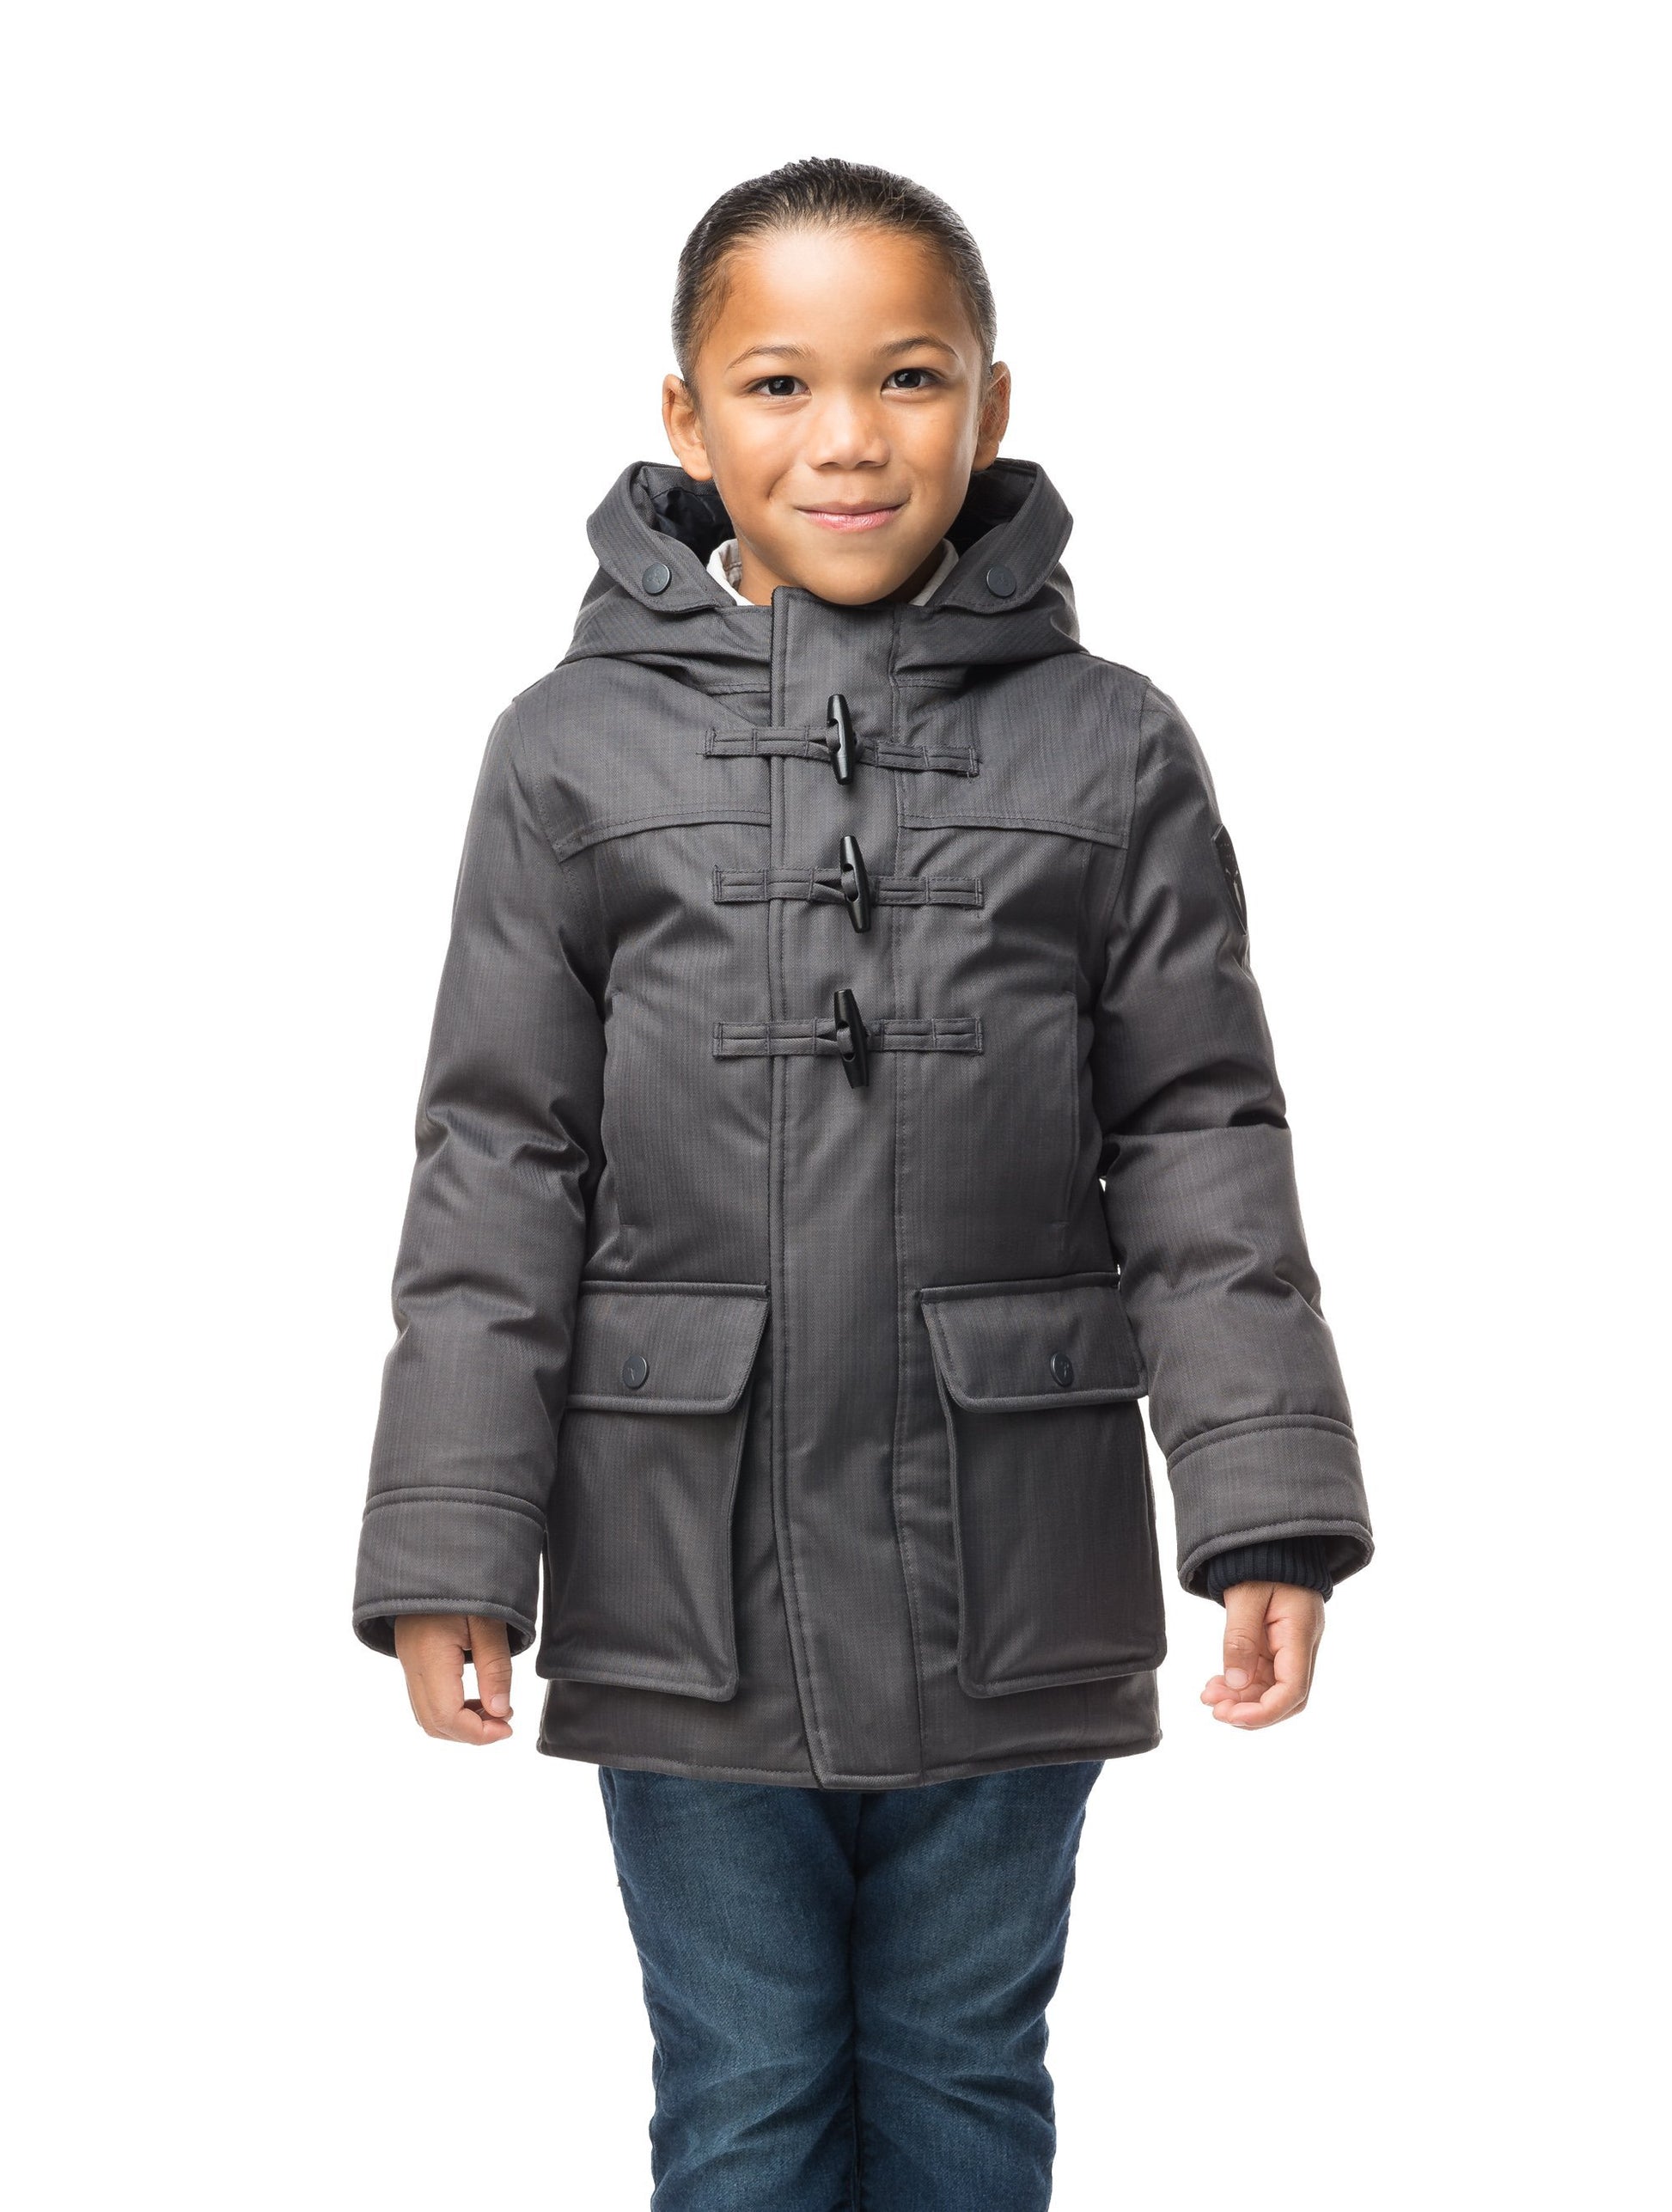 Kid's thigh high down coat with toggle closures in CH Steel Grey